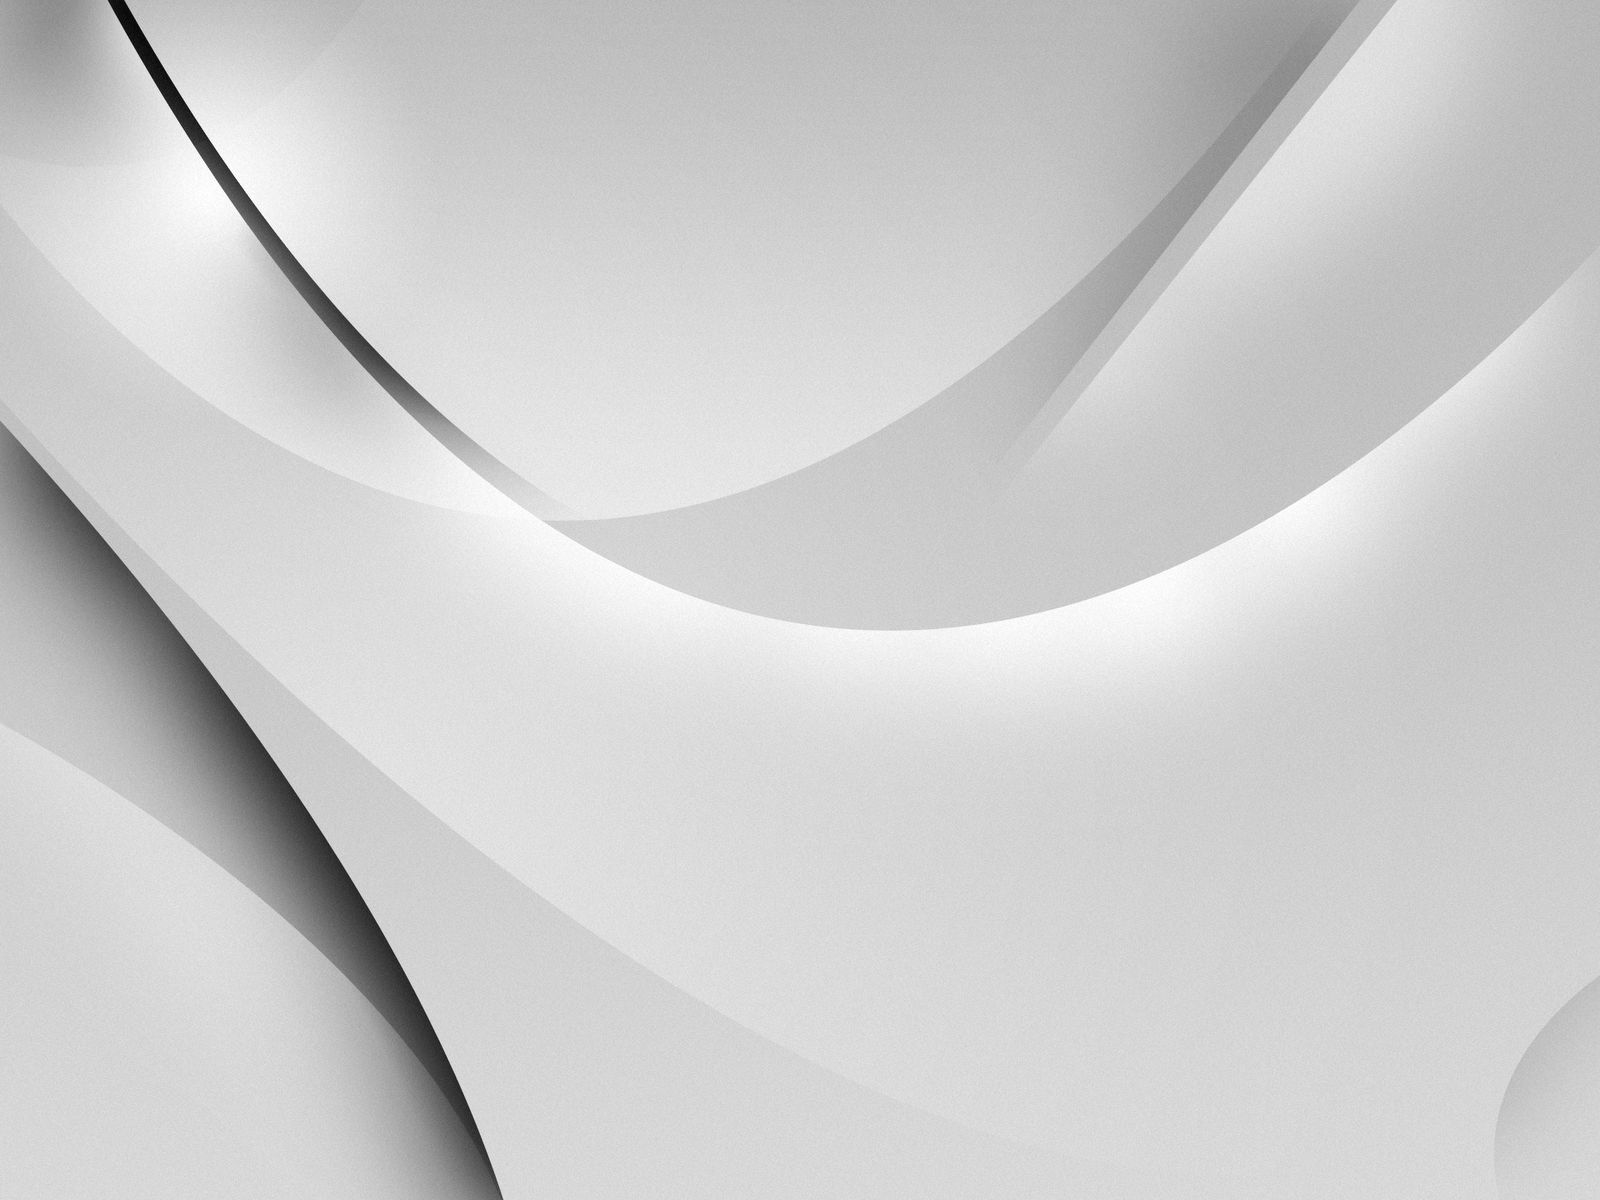 Black and White Wallpaper: Grey Abstract Wallpaper. Abstract wallpaper, White wallpaper, Grey and white wallpaper